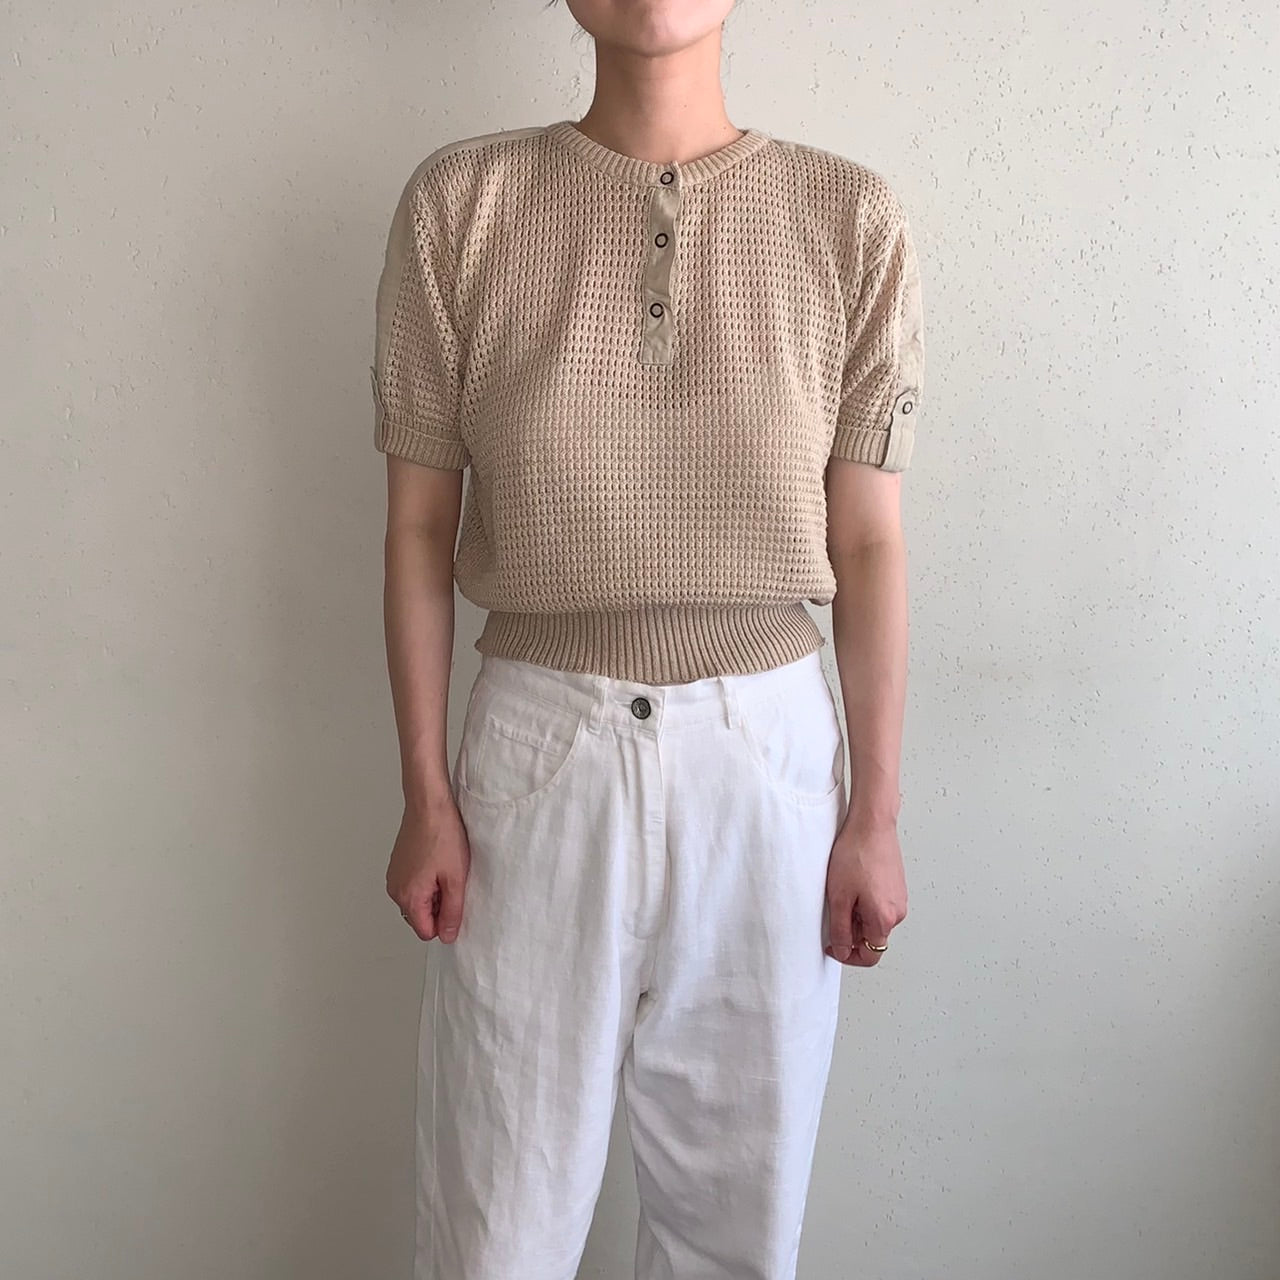 90s Knit Top